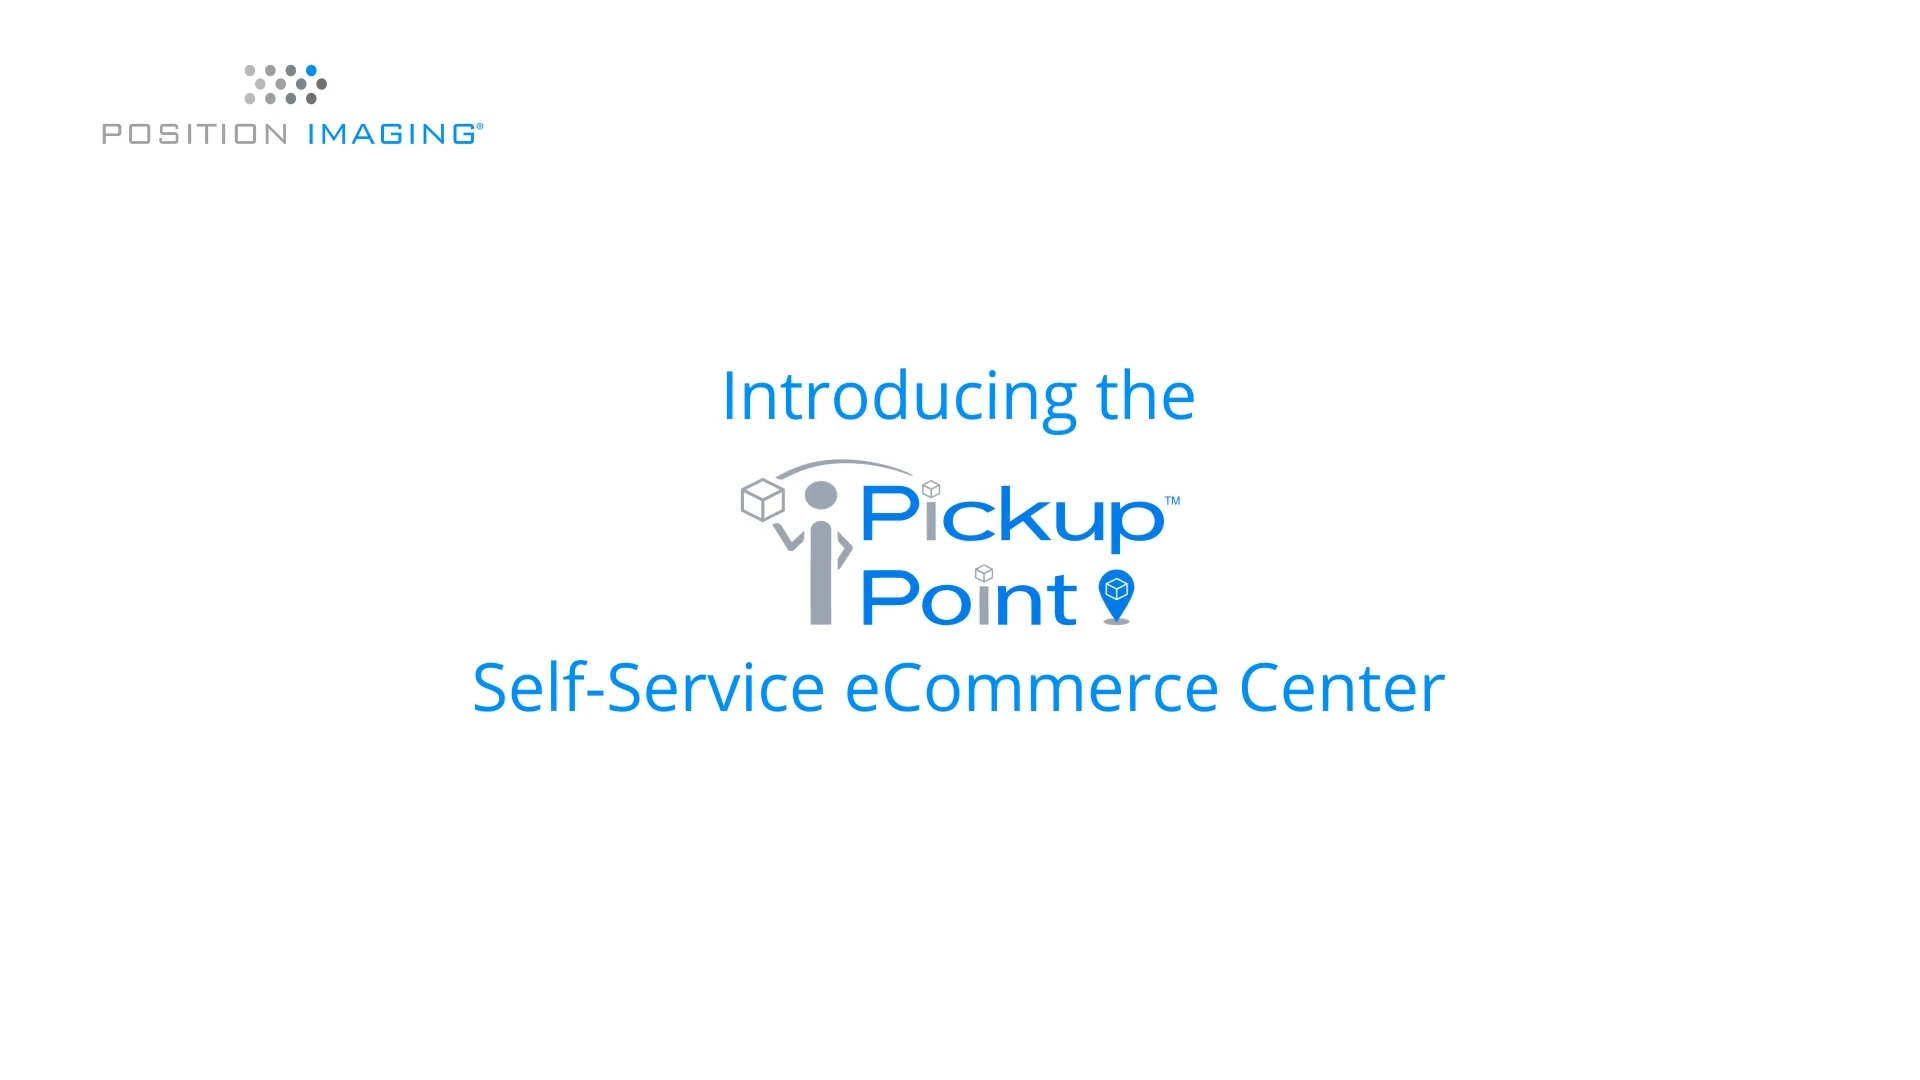 Transform Self-Service E-Commerce with iPickup Point That Redefines Convenience and Security